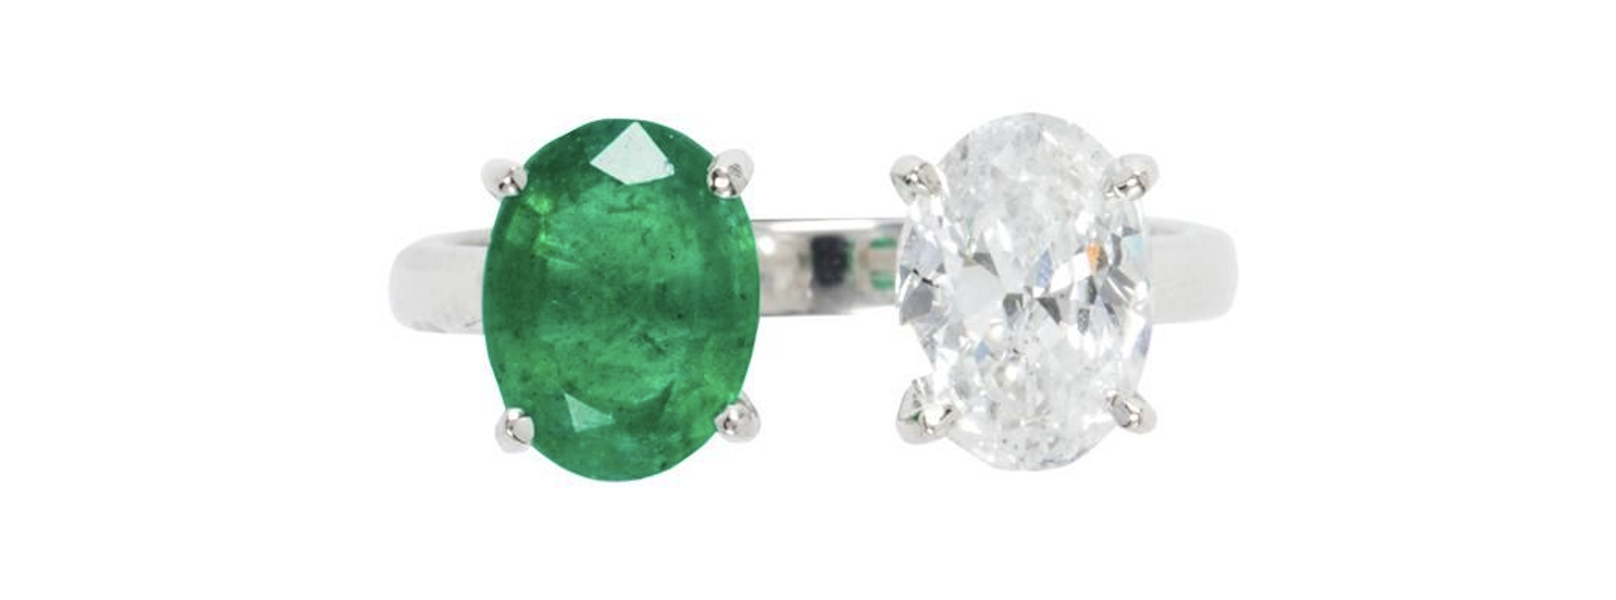 18K white gold, emerald and diamond bypass ring, estimated at $2,000-$4,000. Image courtesy of Clars Auction Gallery and LiveAuctioneers